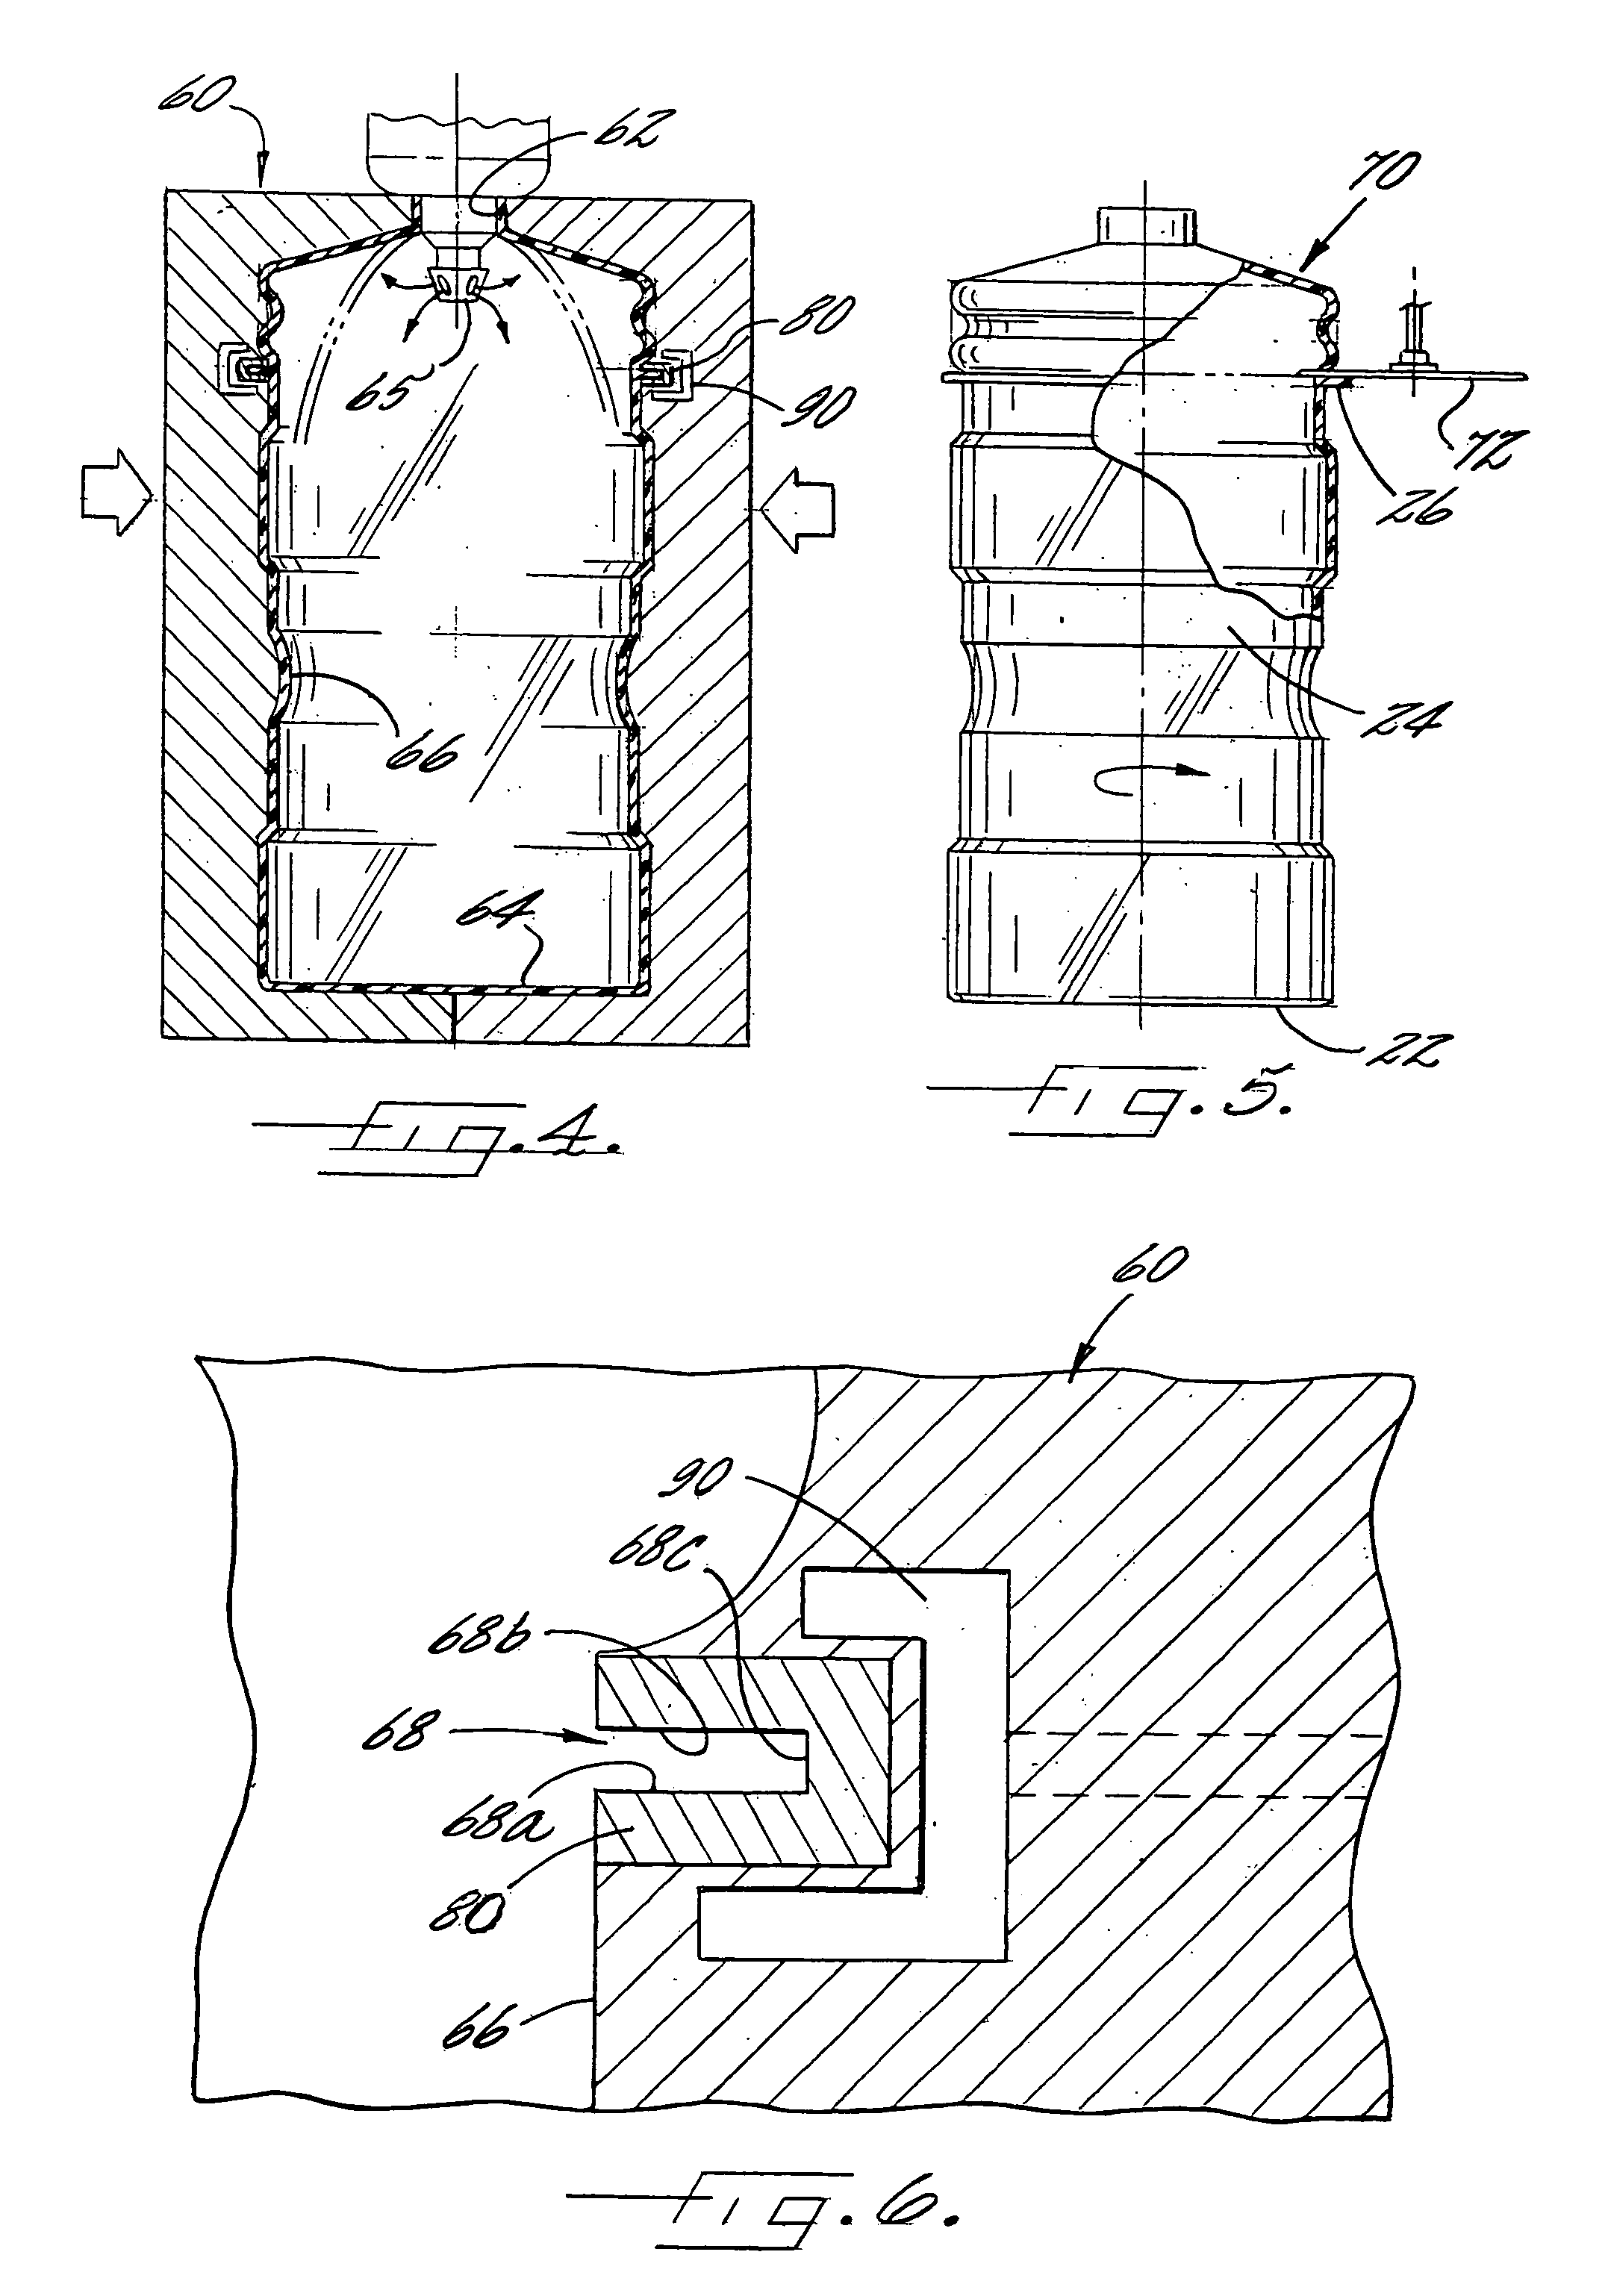 Method and apparatus for blow-molding an article having a solid radially outwardly projecting flange